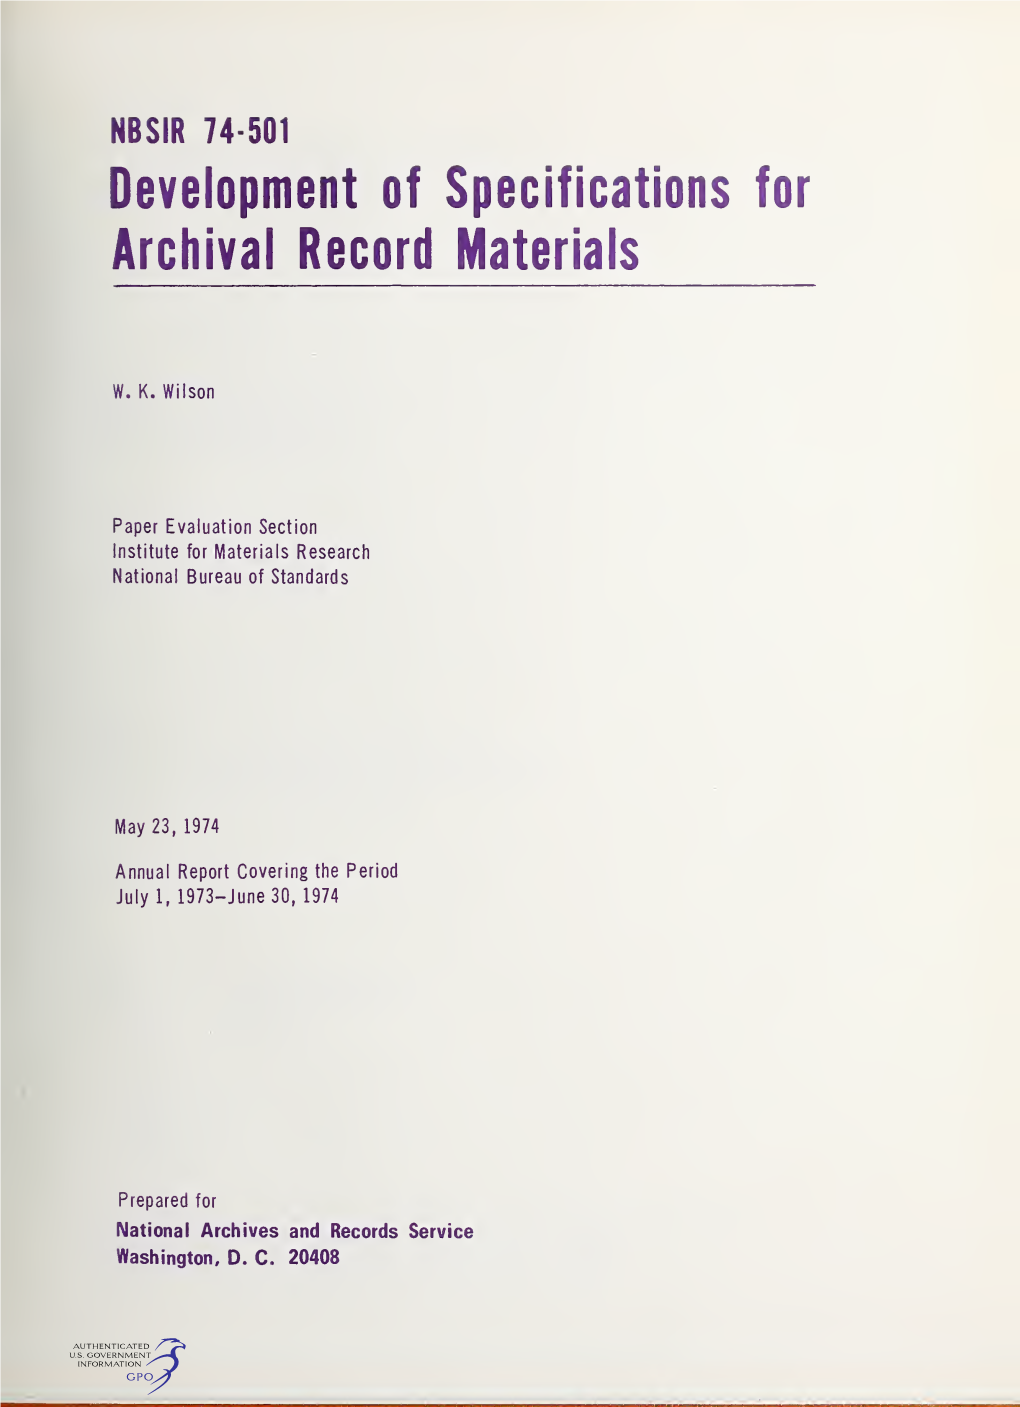 Development of Specifications for Archival Record Materials